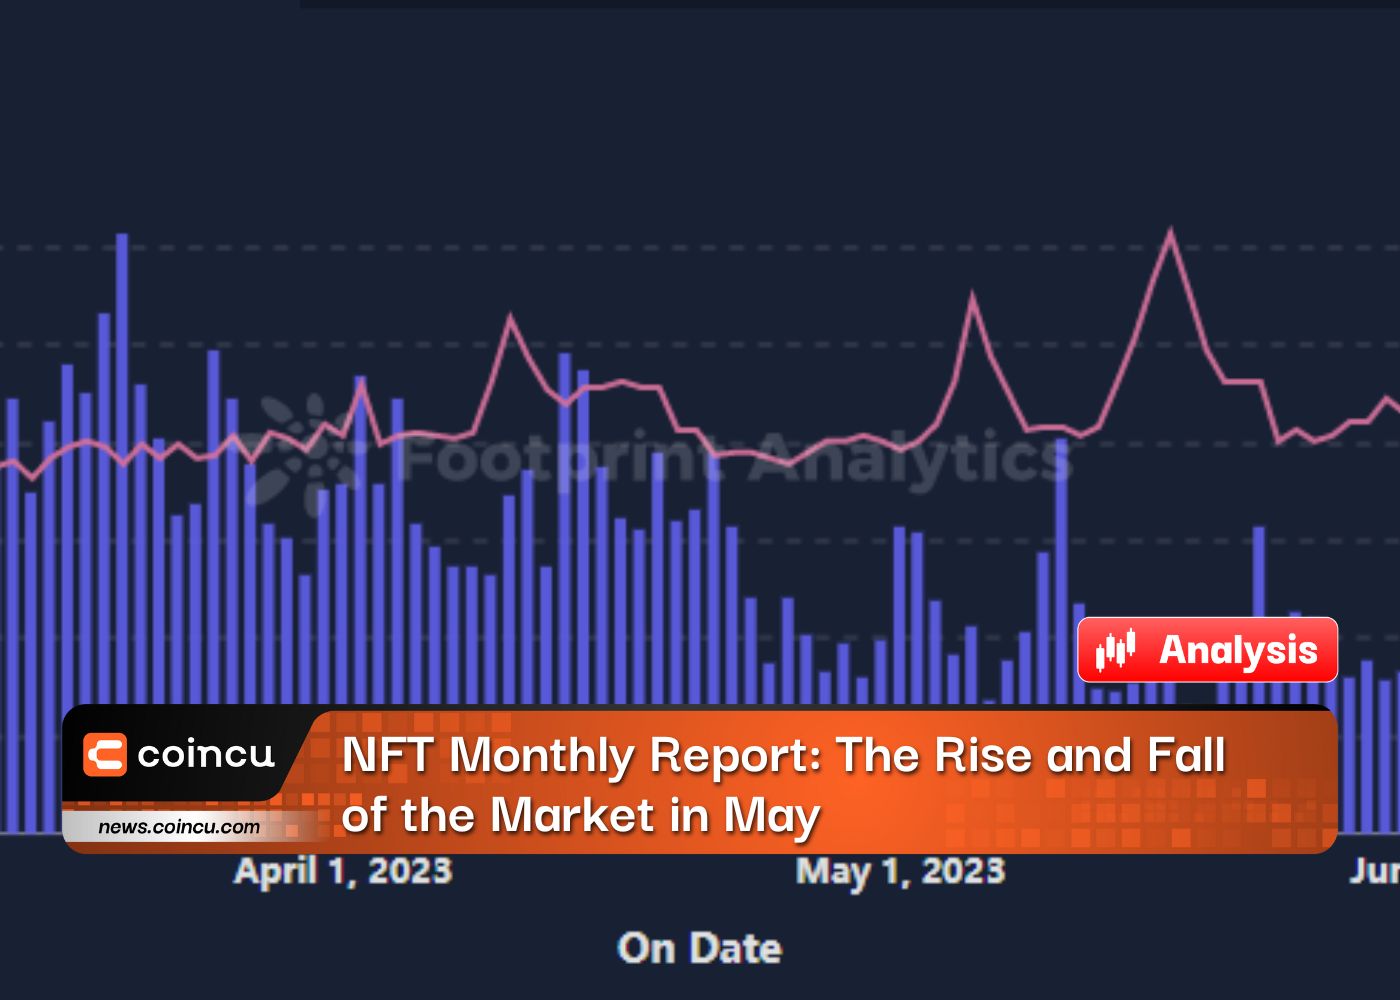 NFT Monthly Report: The Rise and Fall of the Market in May